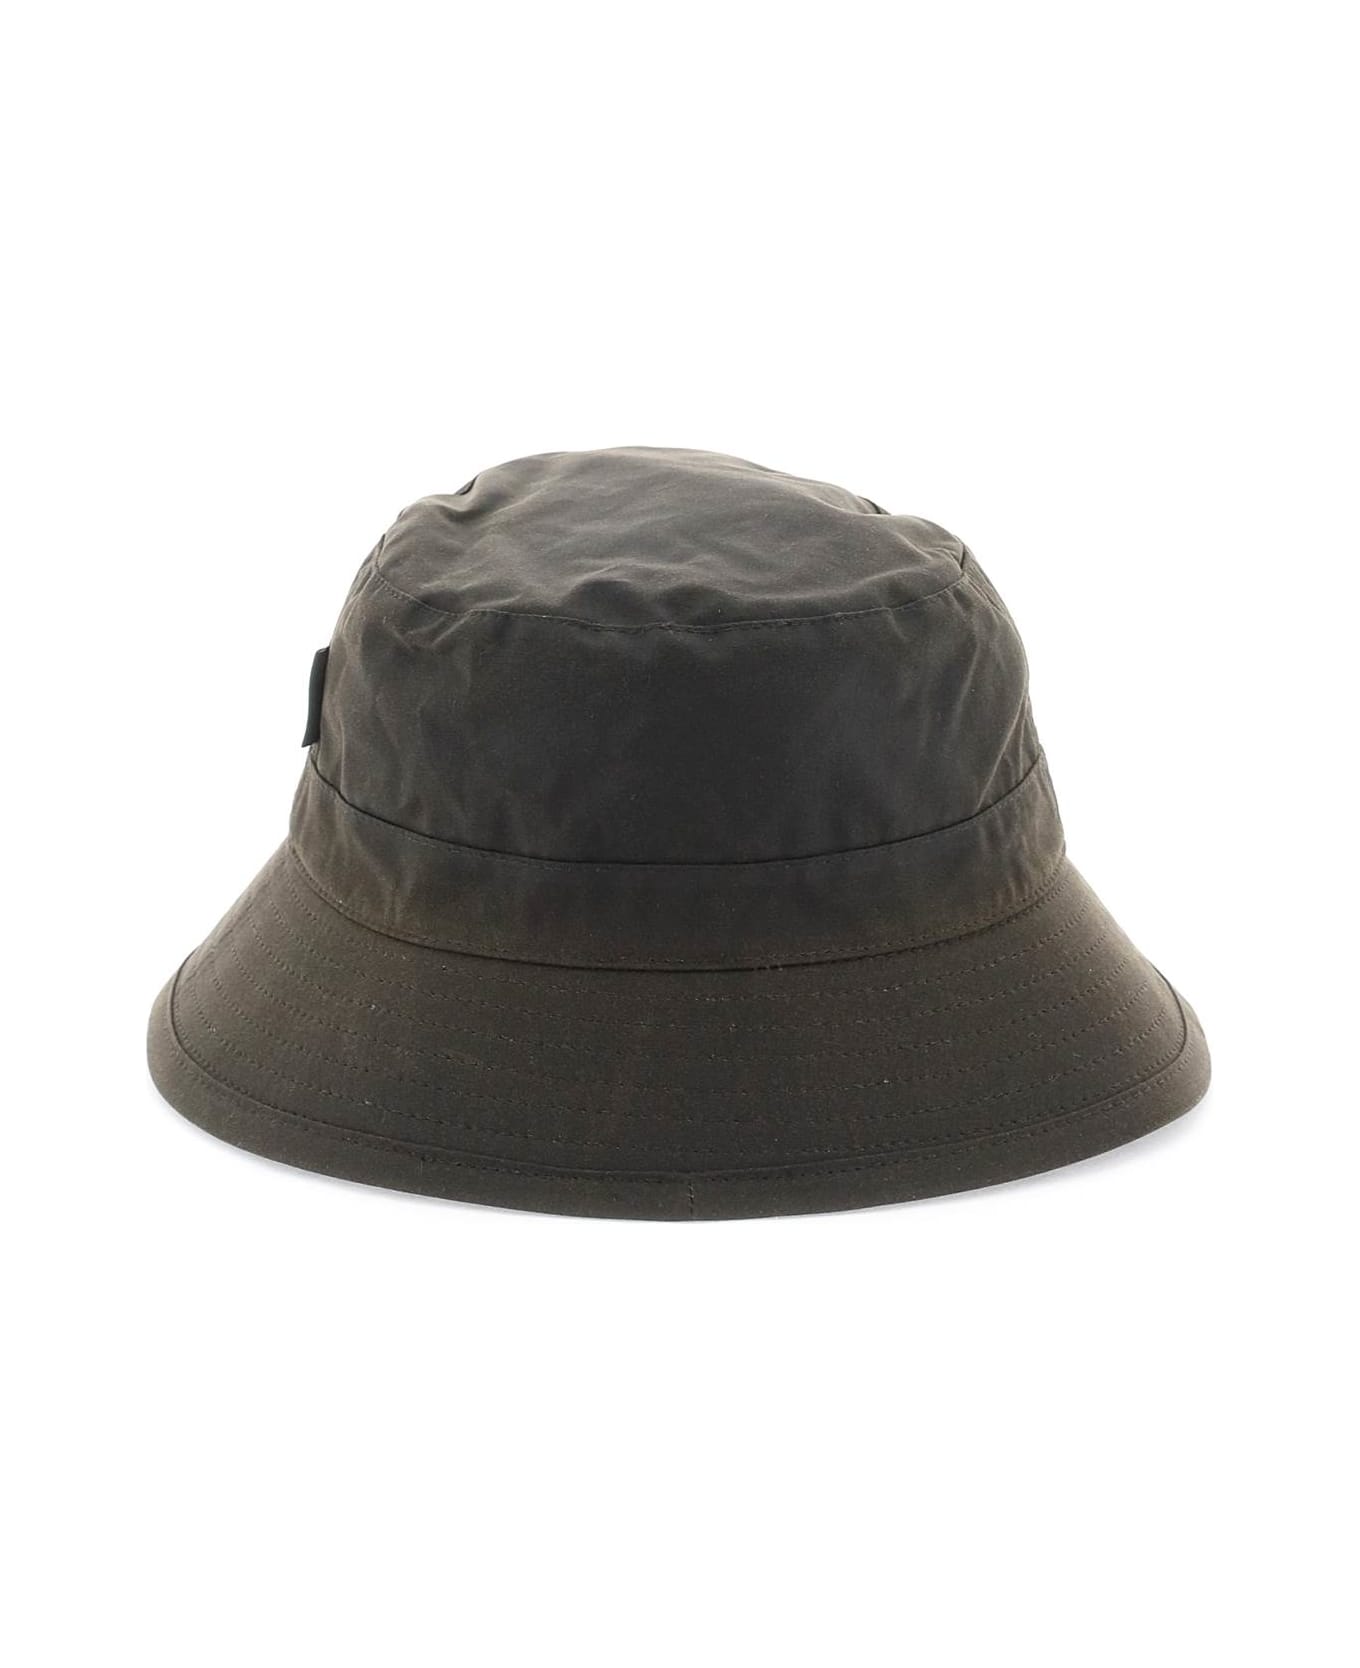 Barbour Waxed Bucket Hat - OLIVE (Brown)